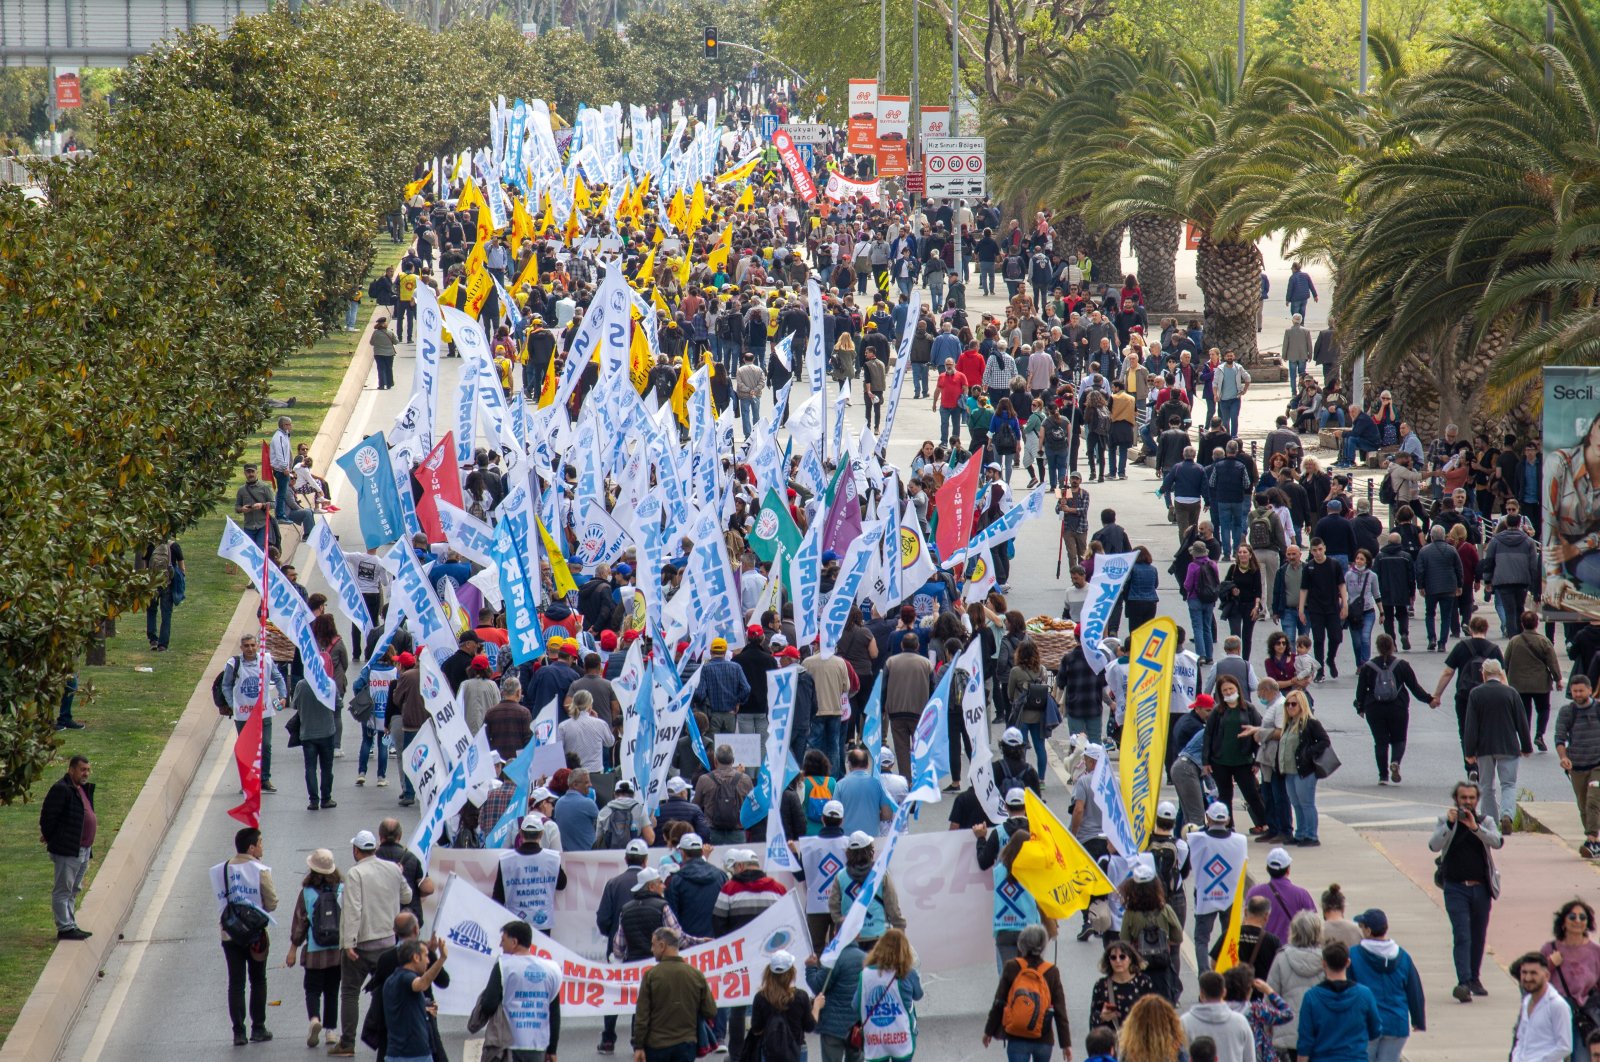 Workers, unions, labor organizations are seen celebrating May 1 in the rally in Maltepe, Istanbul, Türkiye, May 1, 2022. (Shutterstock Photo)